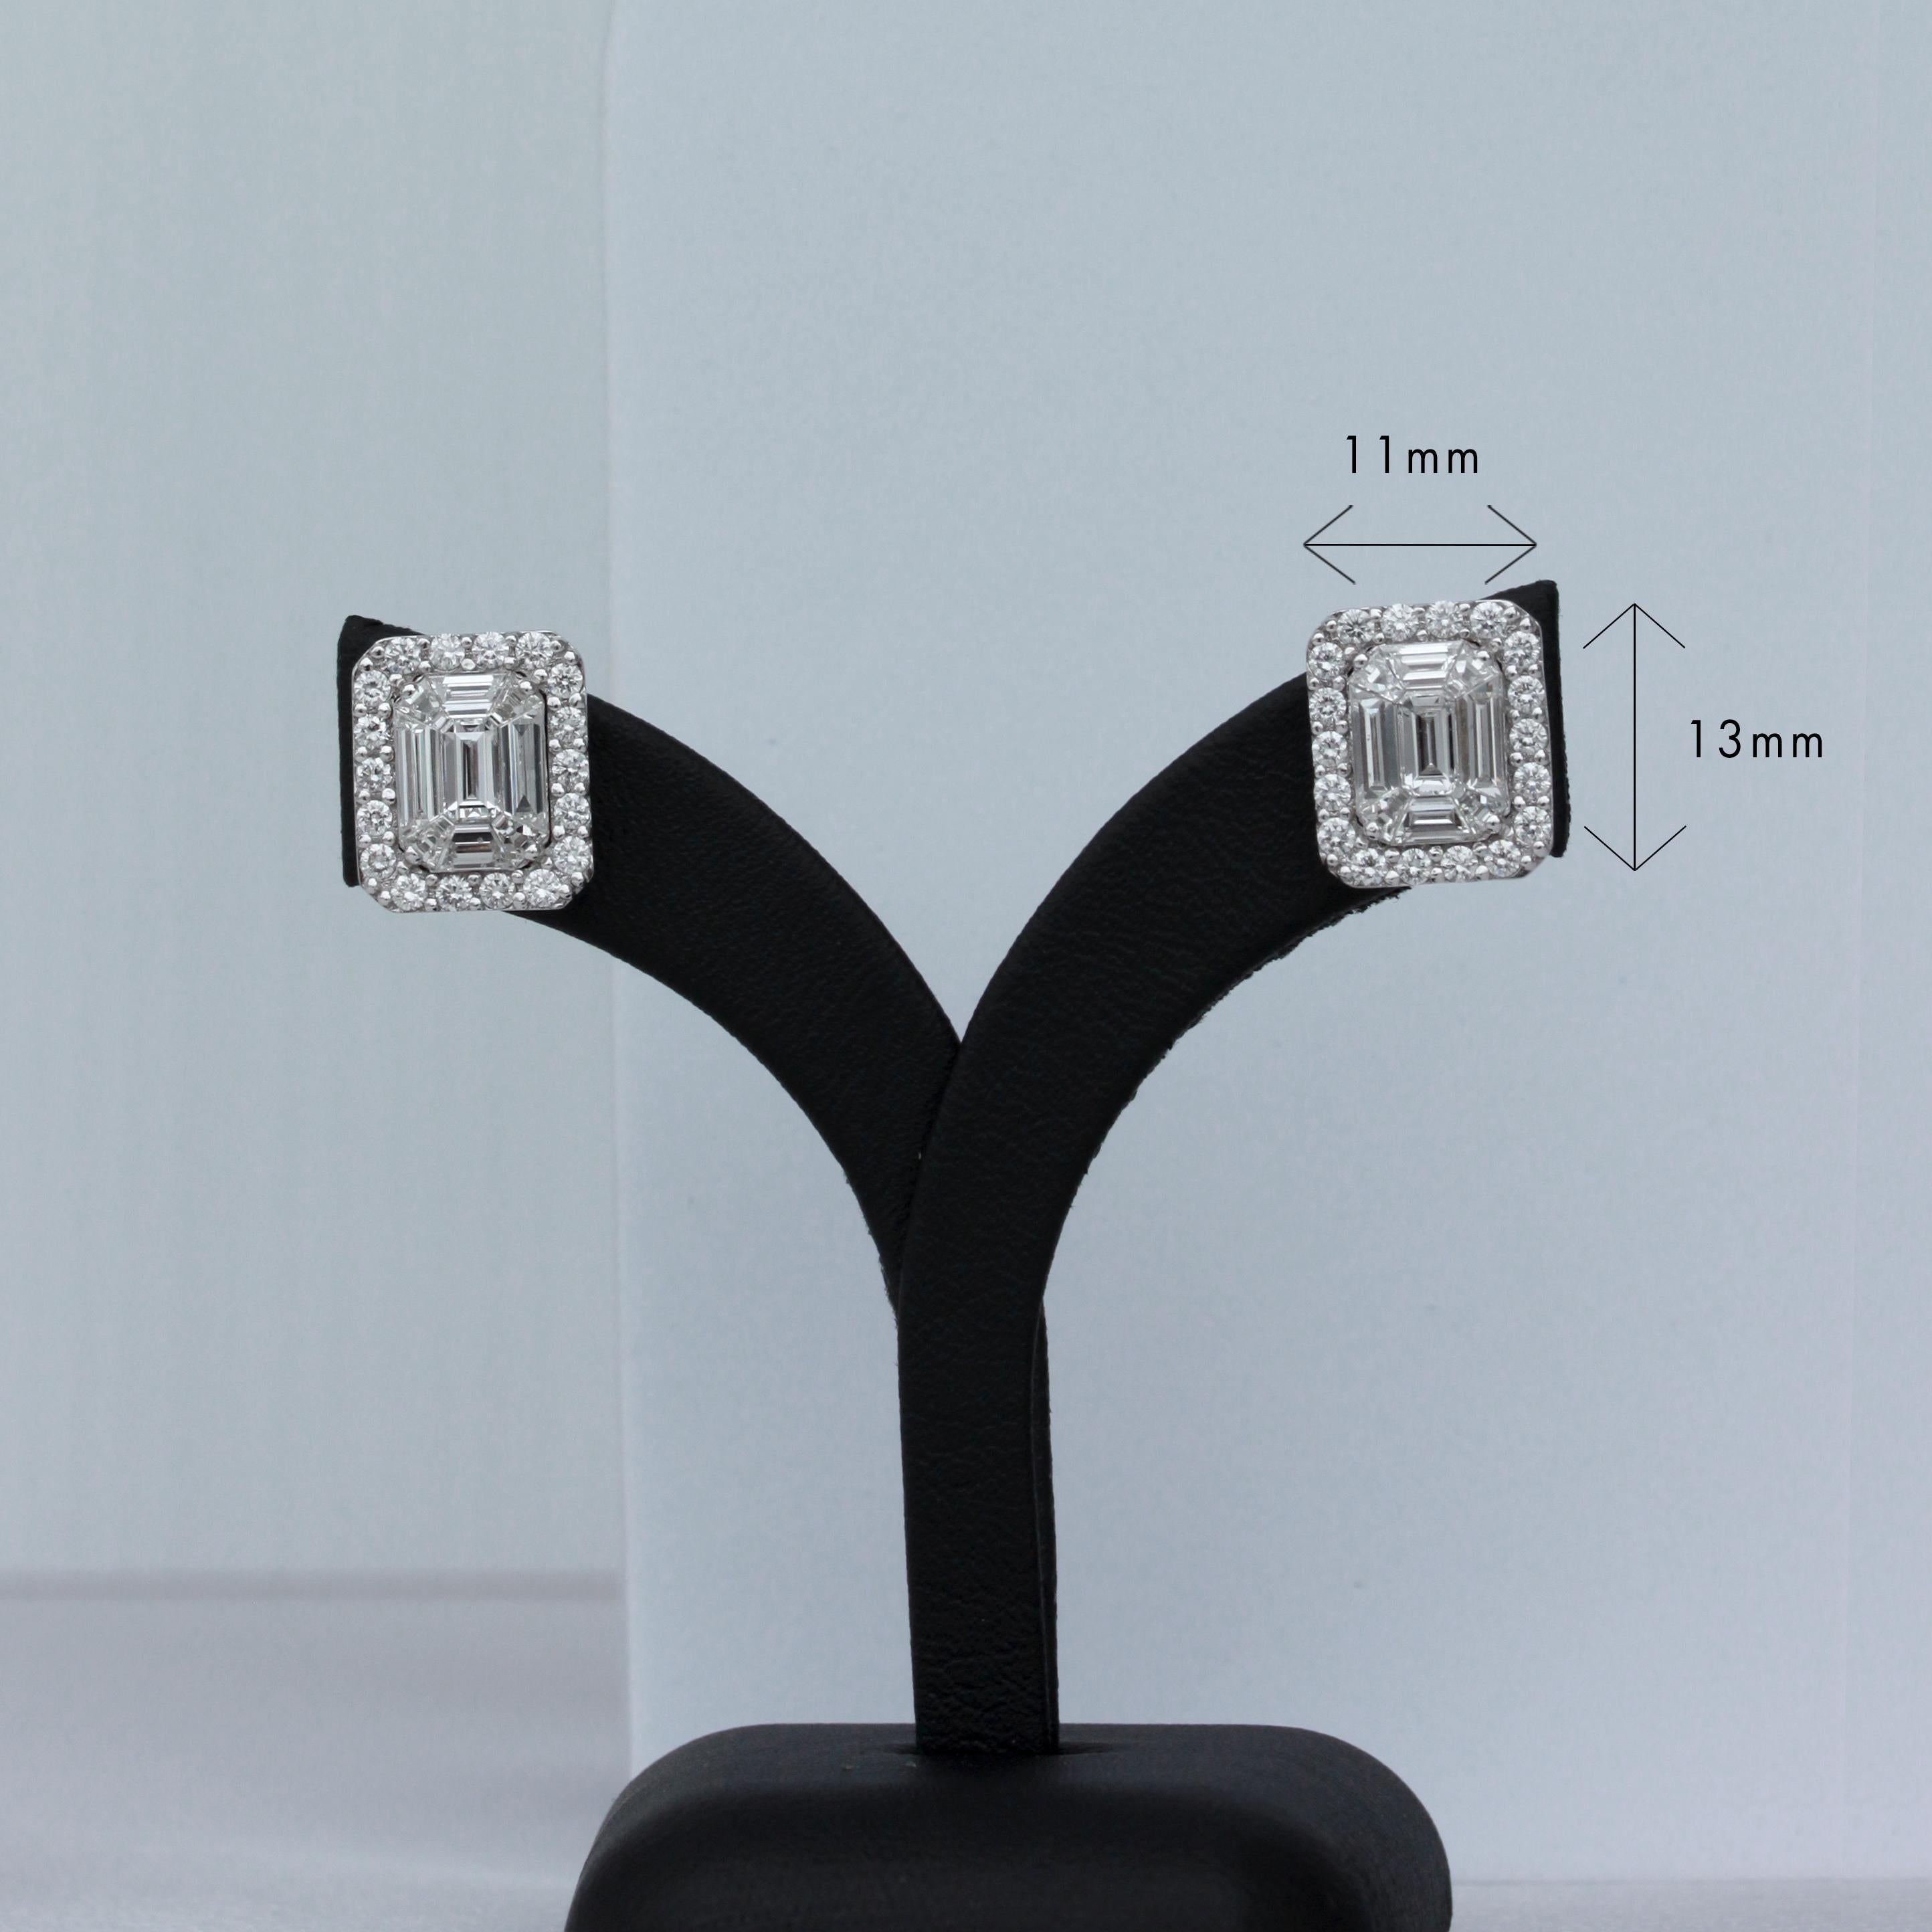 18K White Gold
2.75ct Natural VVS-VS Diamonds (D-G colour)
Total Earring Weight 4.97g

Add a touch of sophistication to your look with these stunning pie-cut diamond studs. The stunning pie-cut diamonds surrounded by beautiful round diamonds give